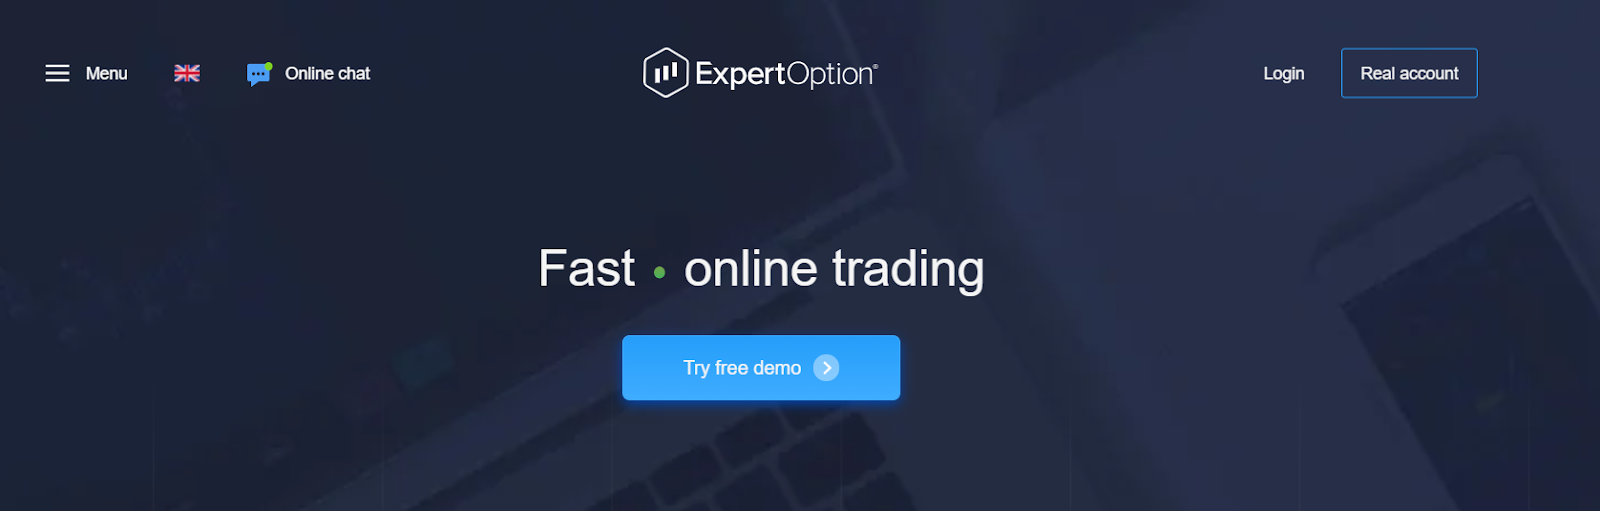 Expert Option Review - Real account